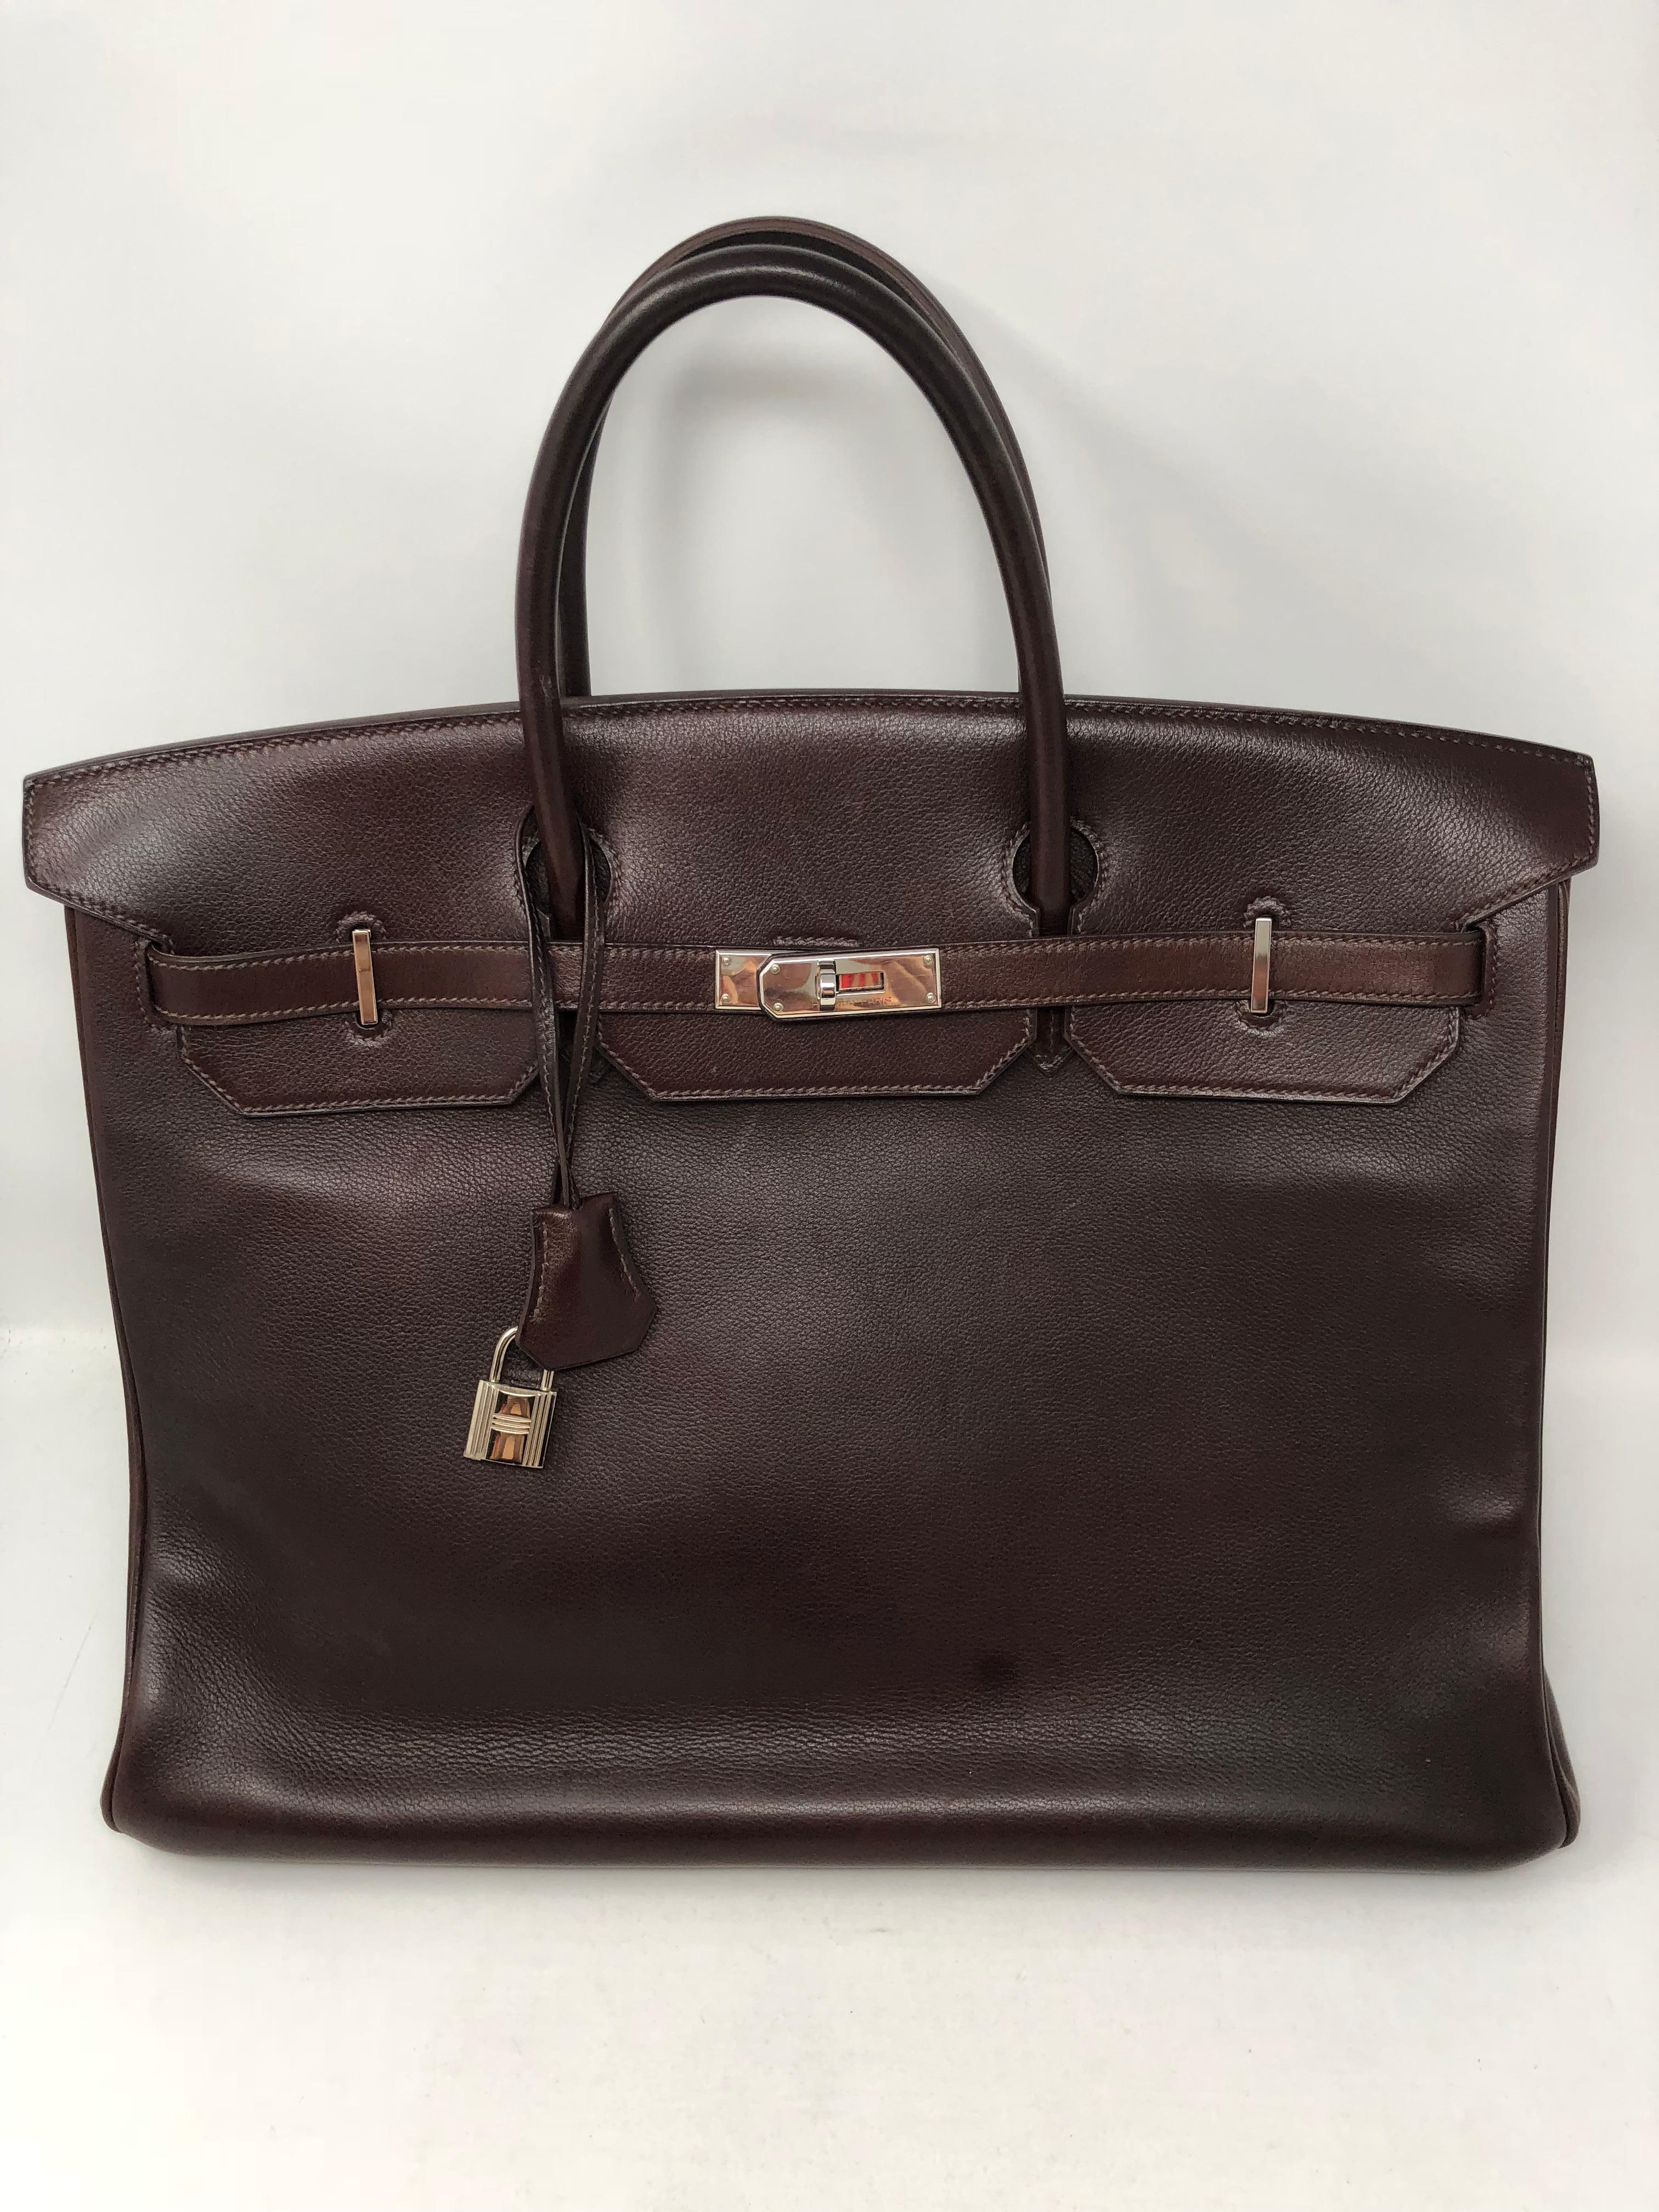 Hermes Birkin 40 Rouge in Swift leather. From 2009 and in good condition. Color is a very dark burgundy almost brown color. Palladium hardware. Neutral color and great travel size bag. Includes dustbag, key, lock and clochette. Guaranteed authentic. 